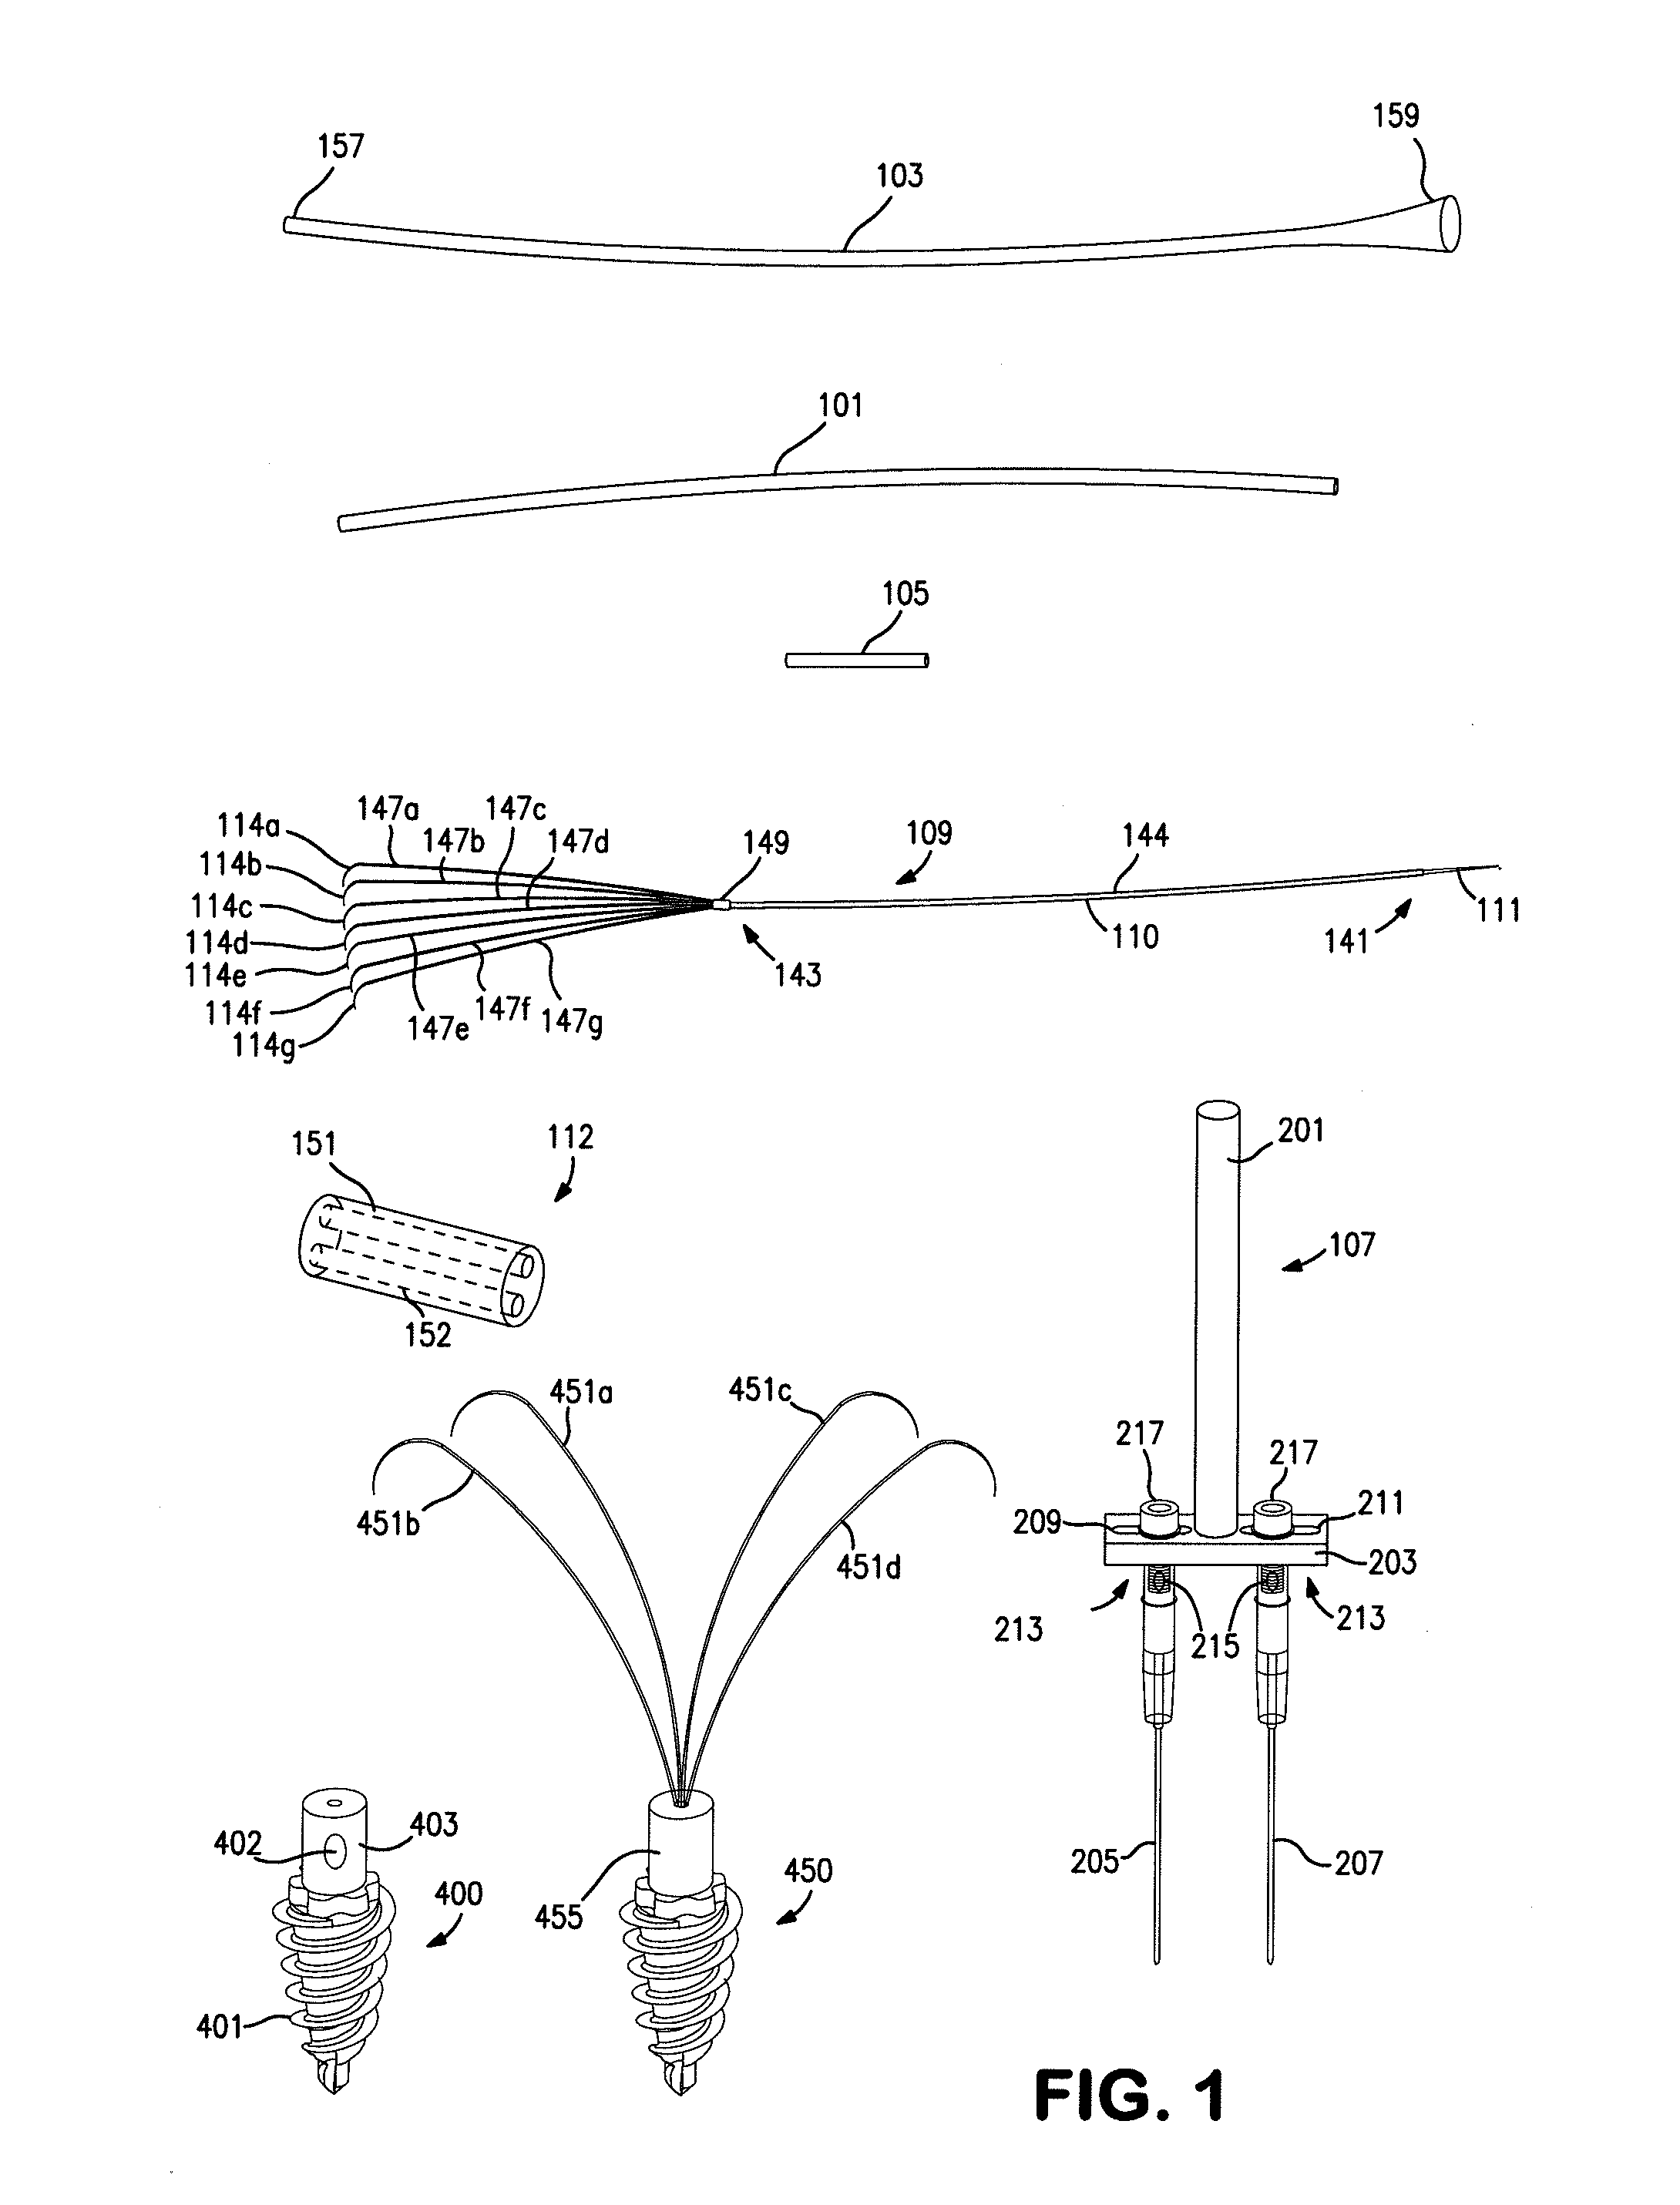 Method and apparatus for repairing a tendon or ligament